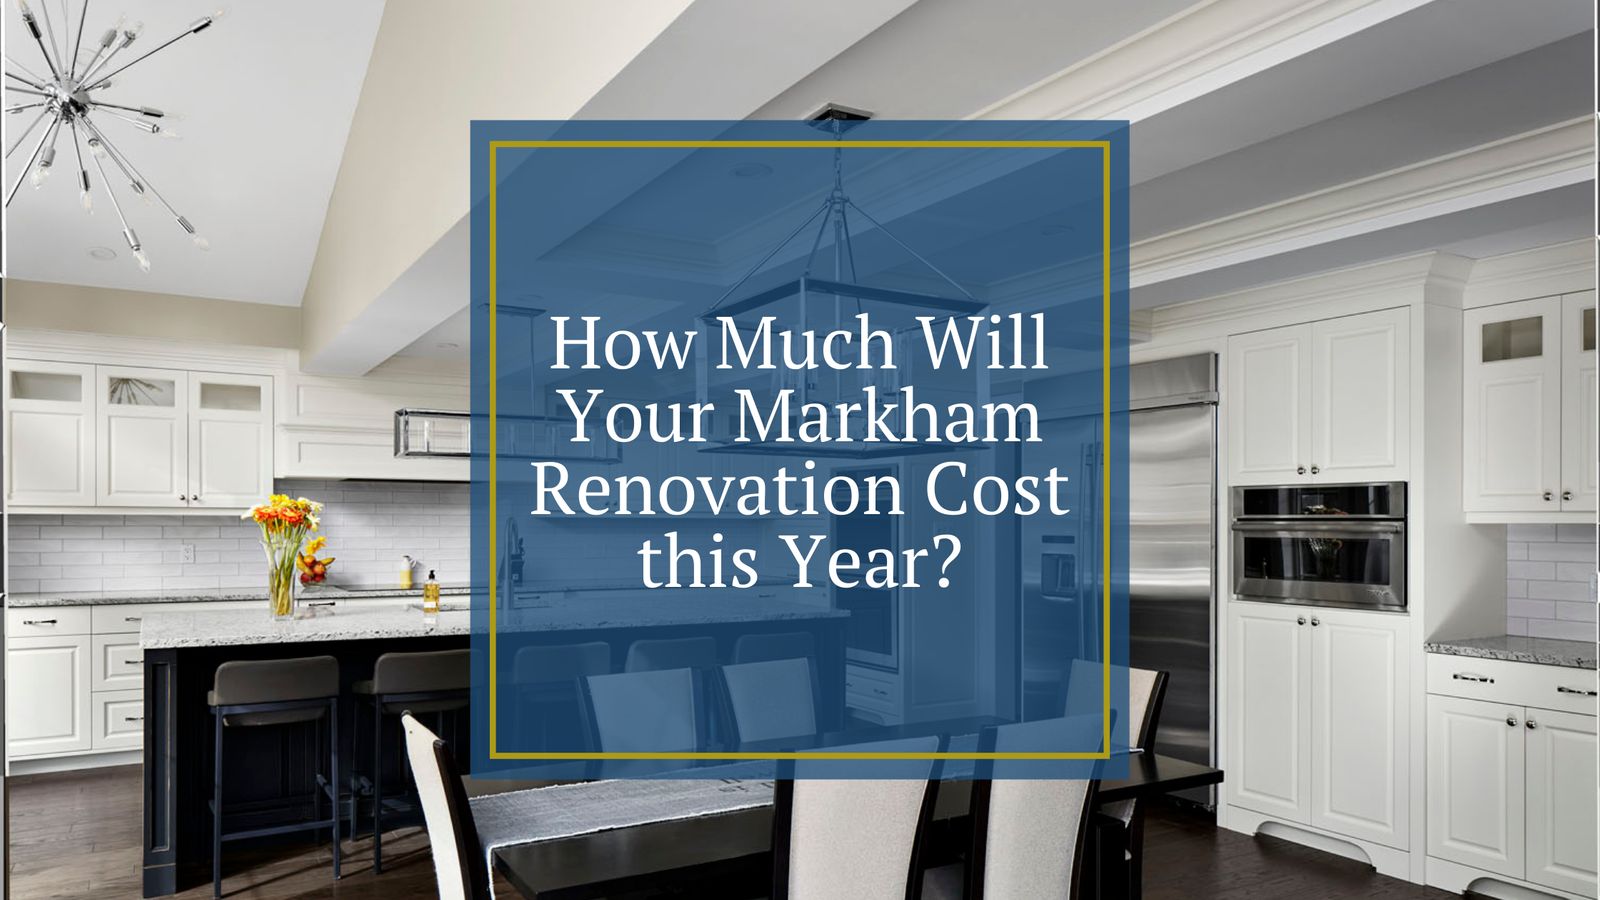 How Much Will Your Markham Home Renovation Cost this Year?